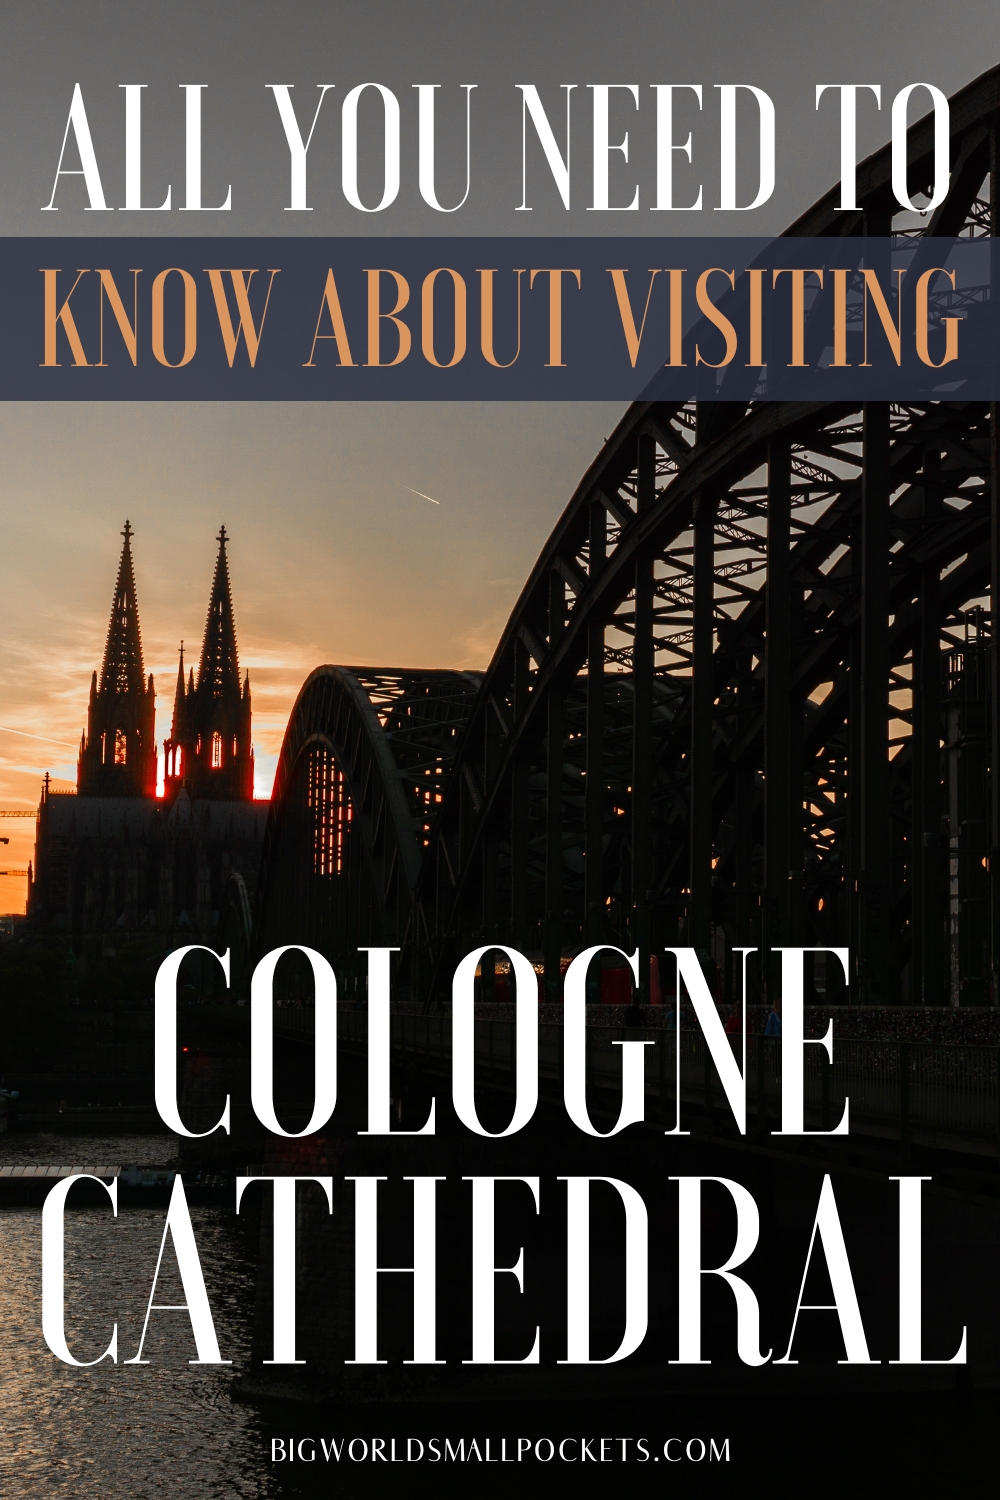 All You Need to Know About Visiting Cologne Cathedral